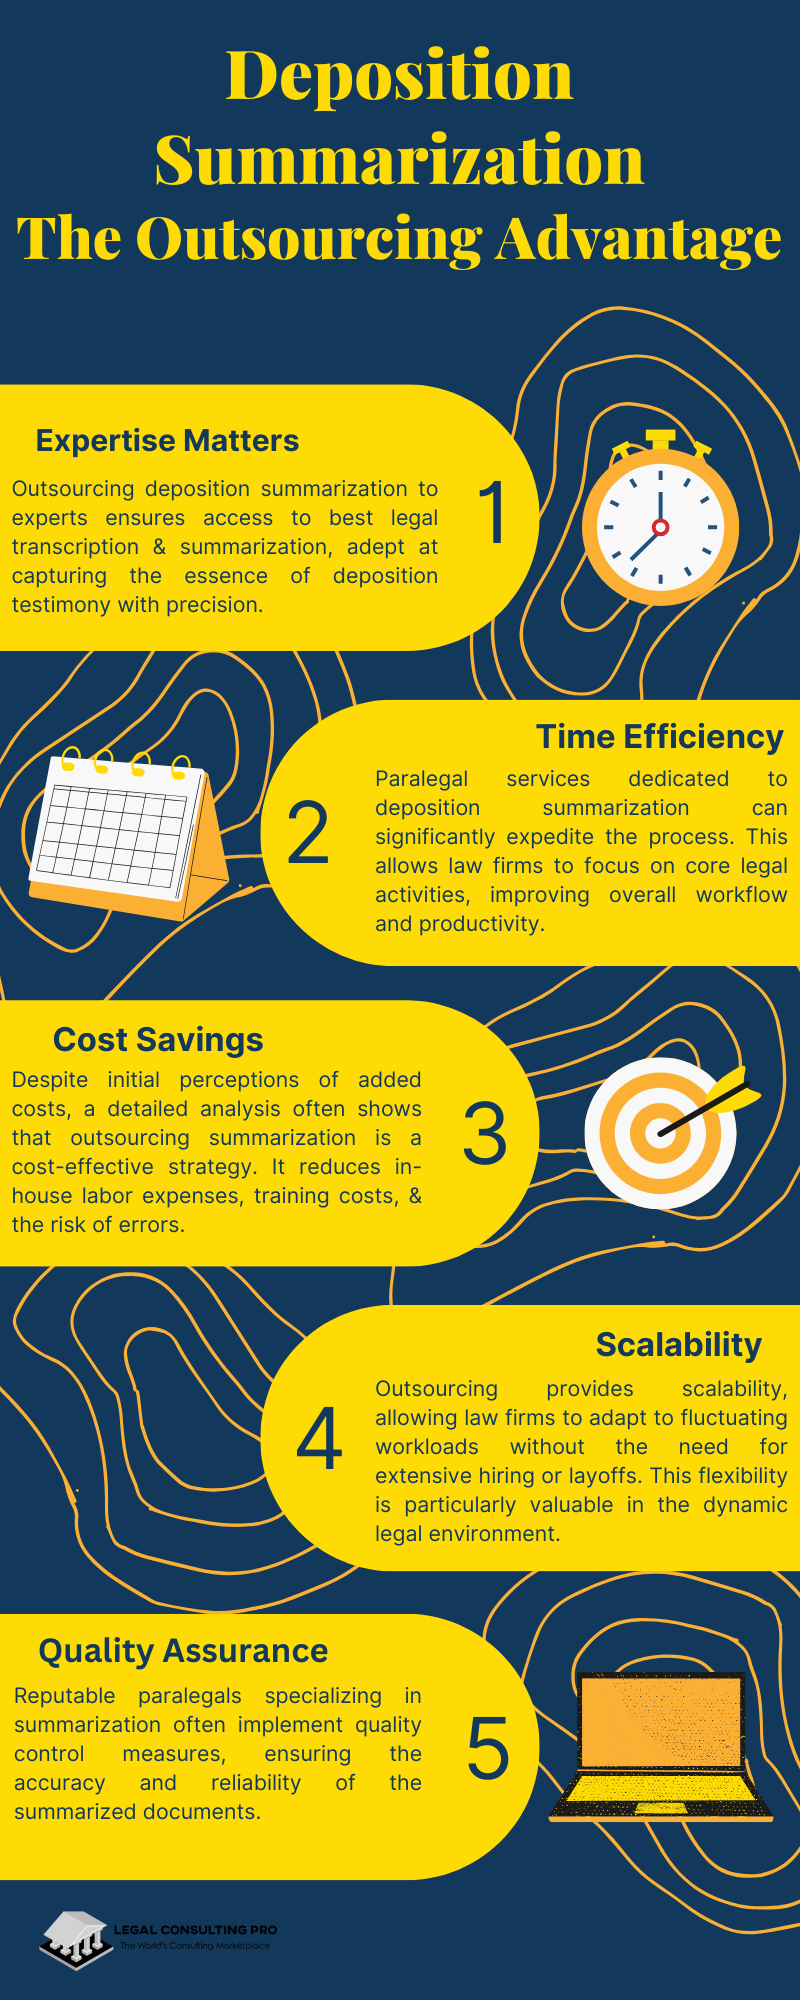 Deposition Summarization The Outsourcing Advantage Infographic